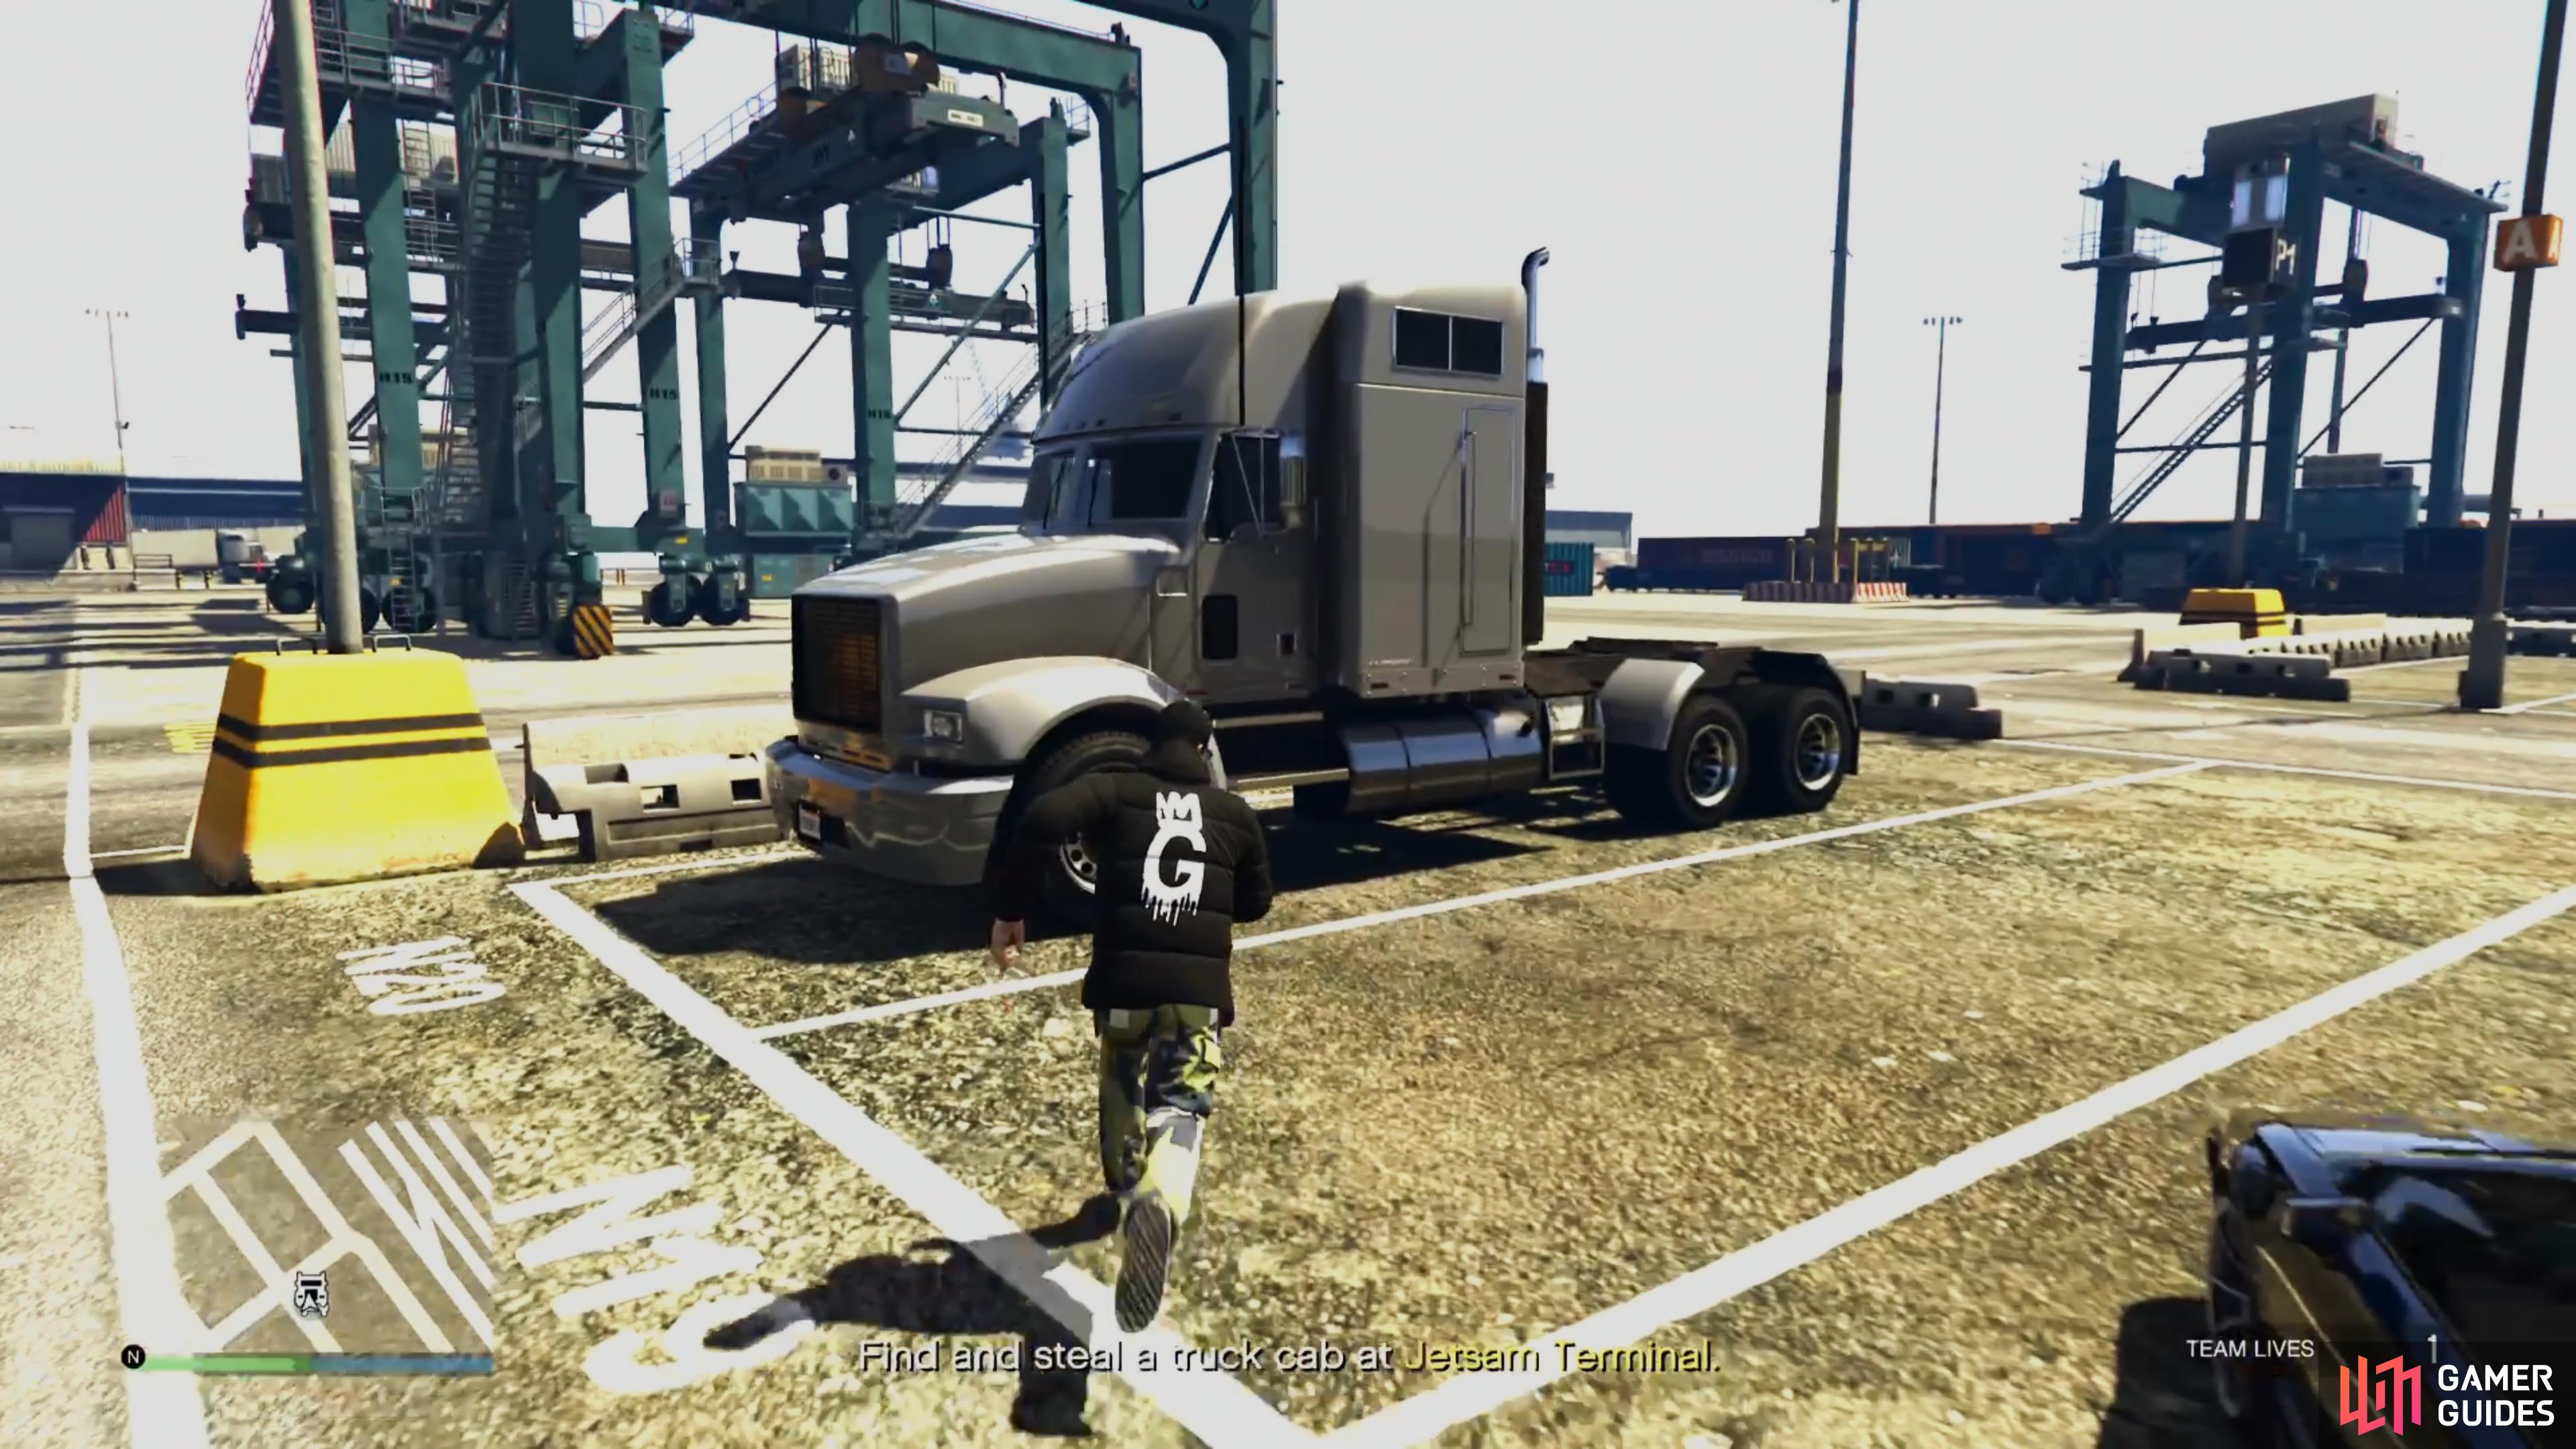 Head to the Jetsam Terminal and pick up a Truck Cab, then collect the Trailer.